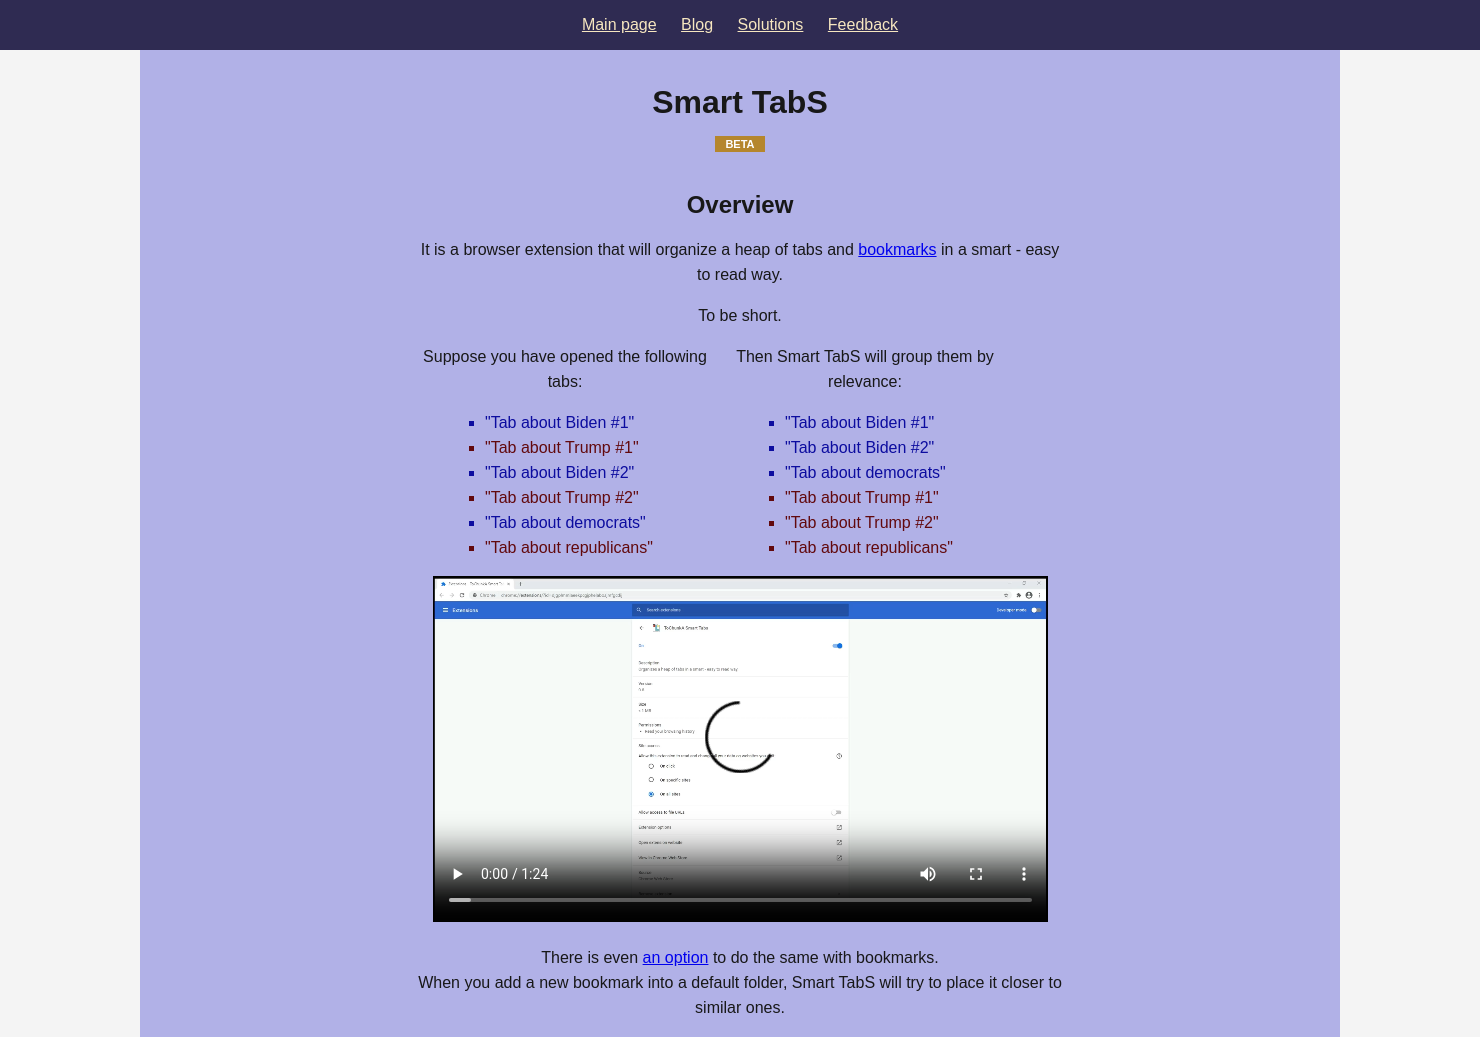 startuptile ToChunkA Smart TabS-A browser ext that groups tabs and bookmarks by similarity.